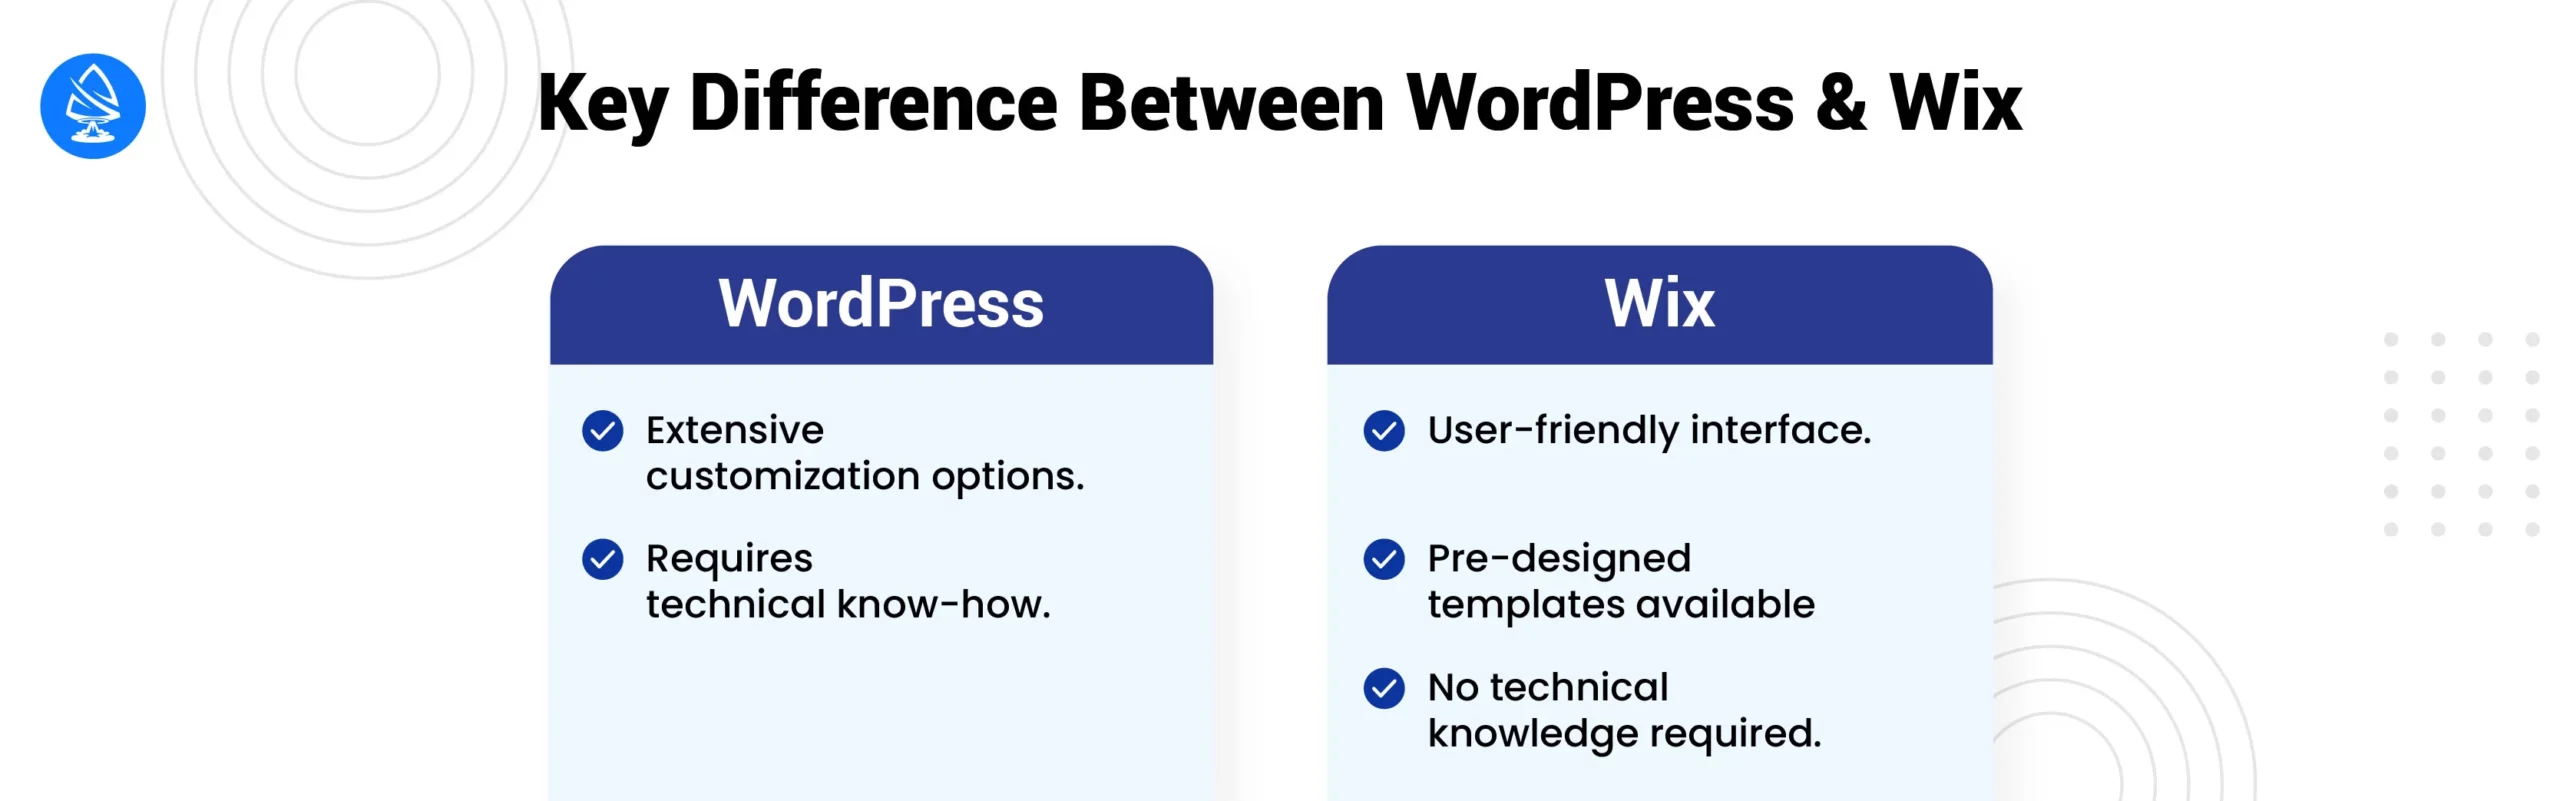 Key Differences Between WordPress and Wix